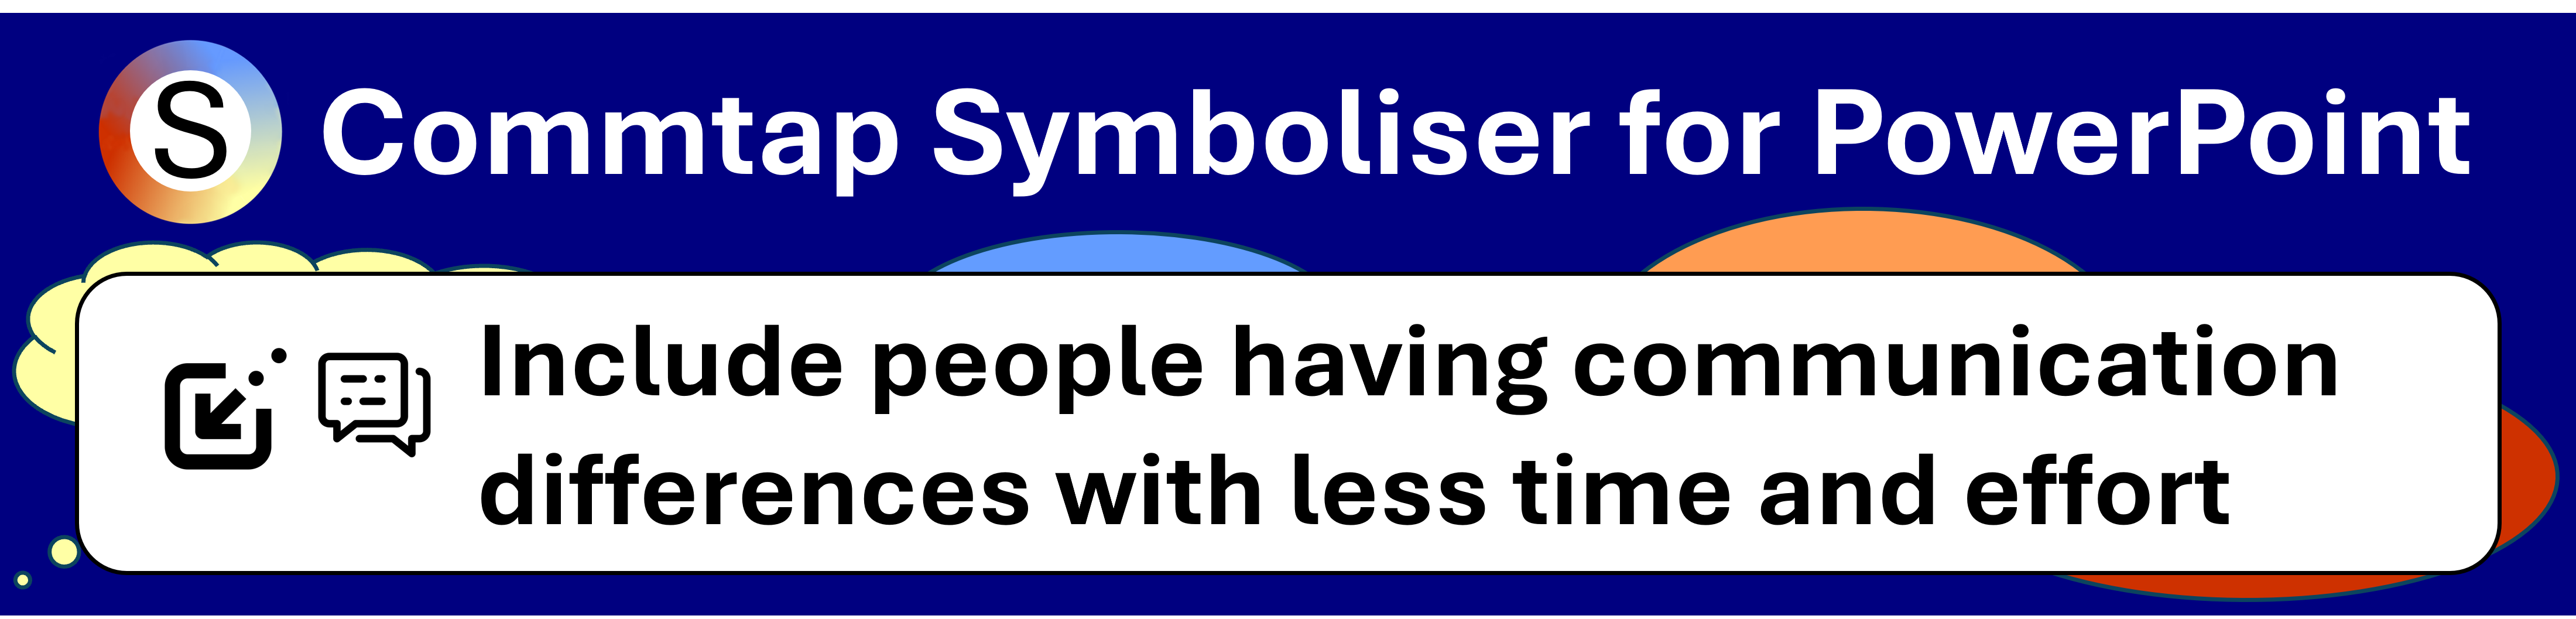 Commtap Symboliser for PowerPoint - include people with communication differences